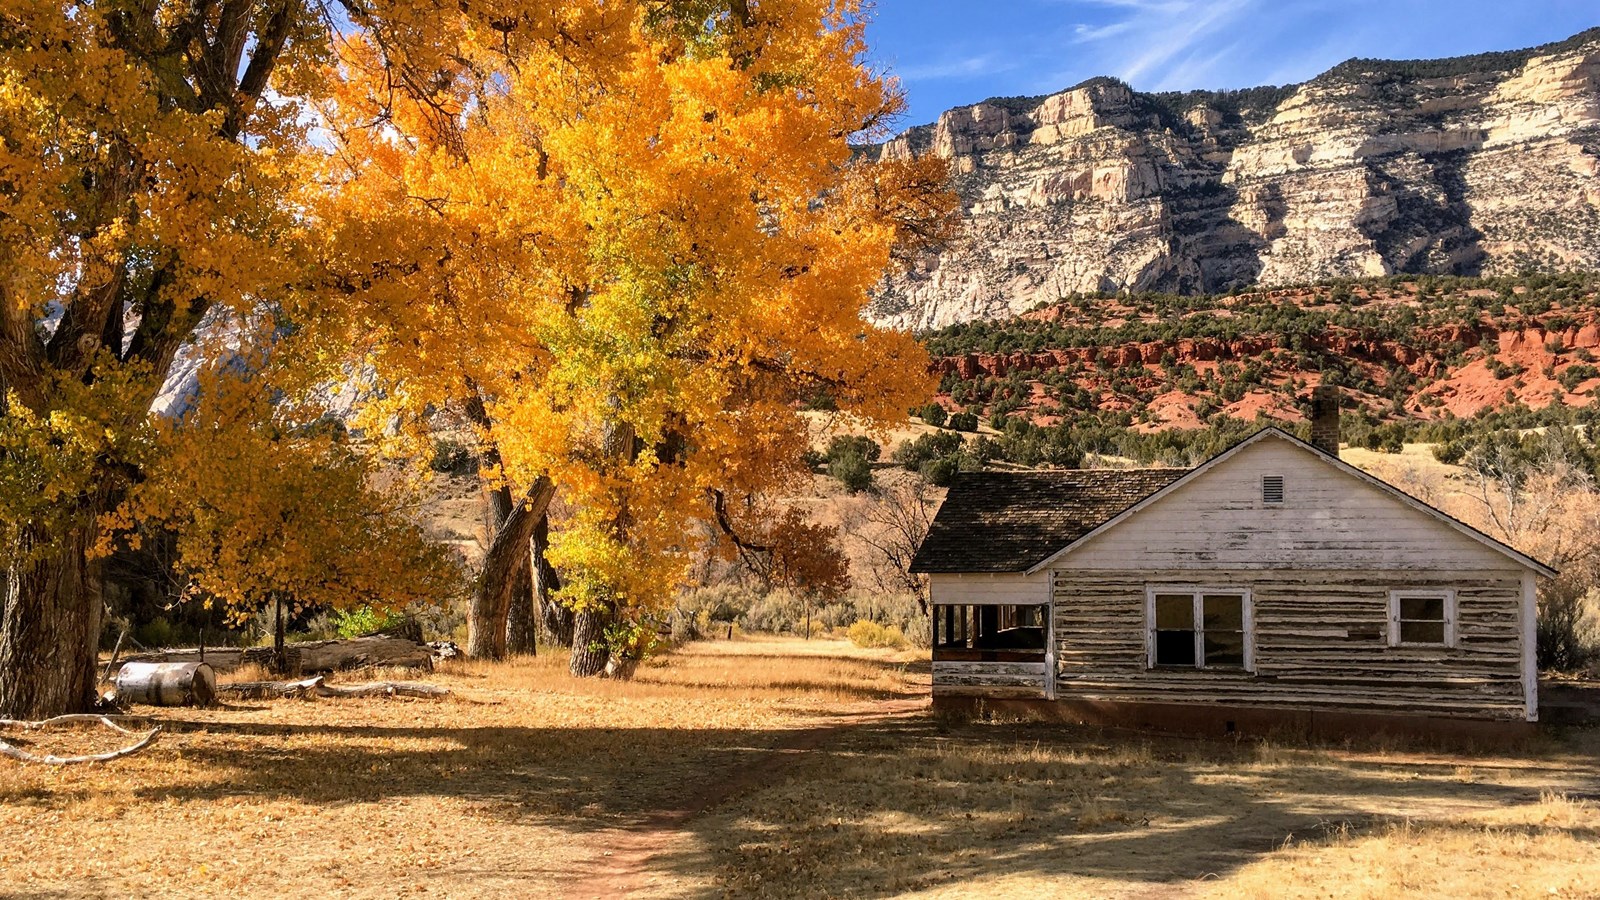 River cottonwood trees in yellow fall foliage shade the historic Chew ranch house.